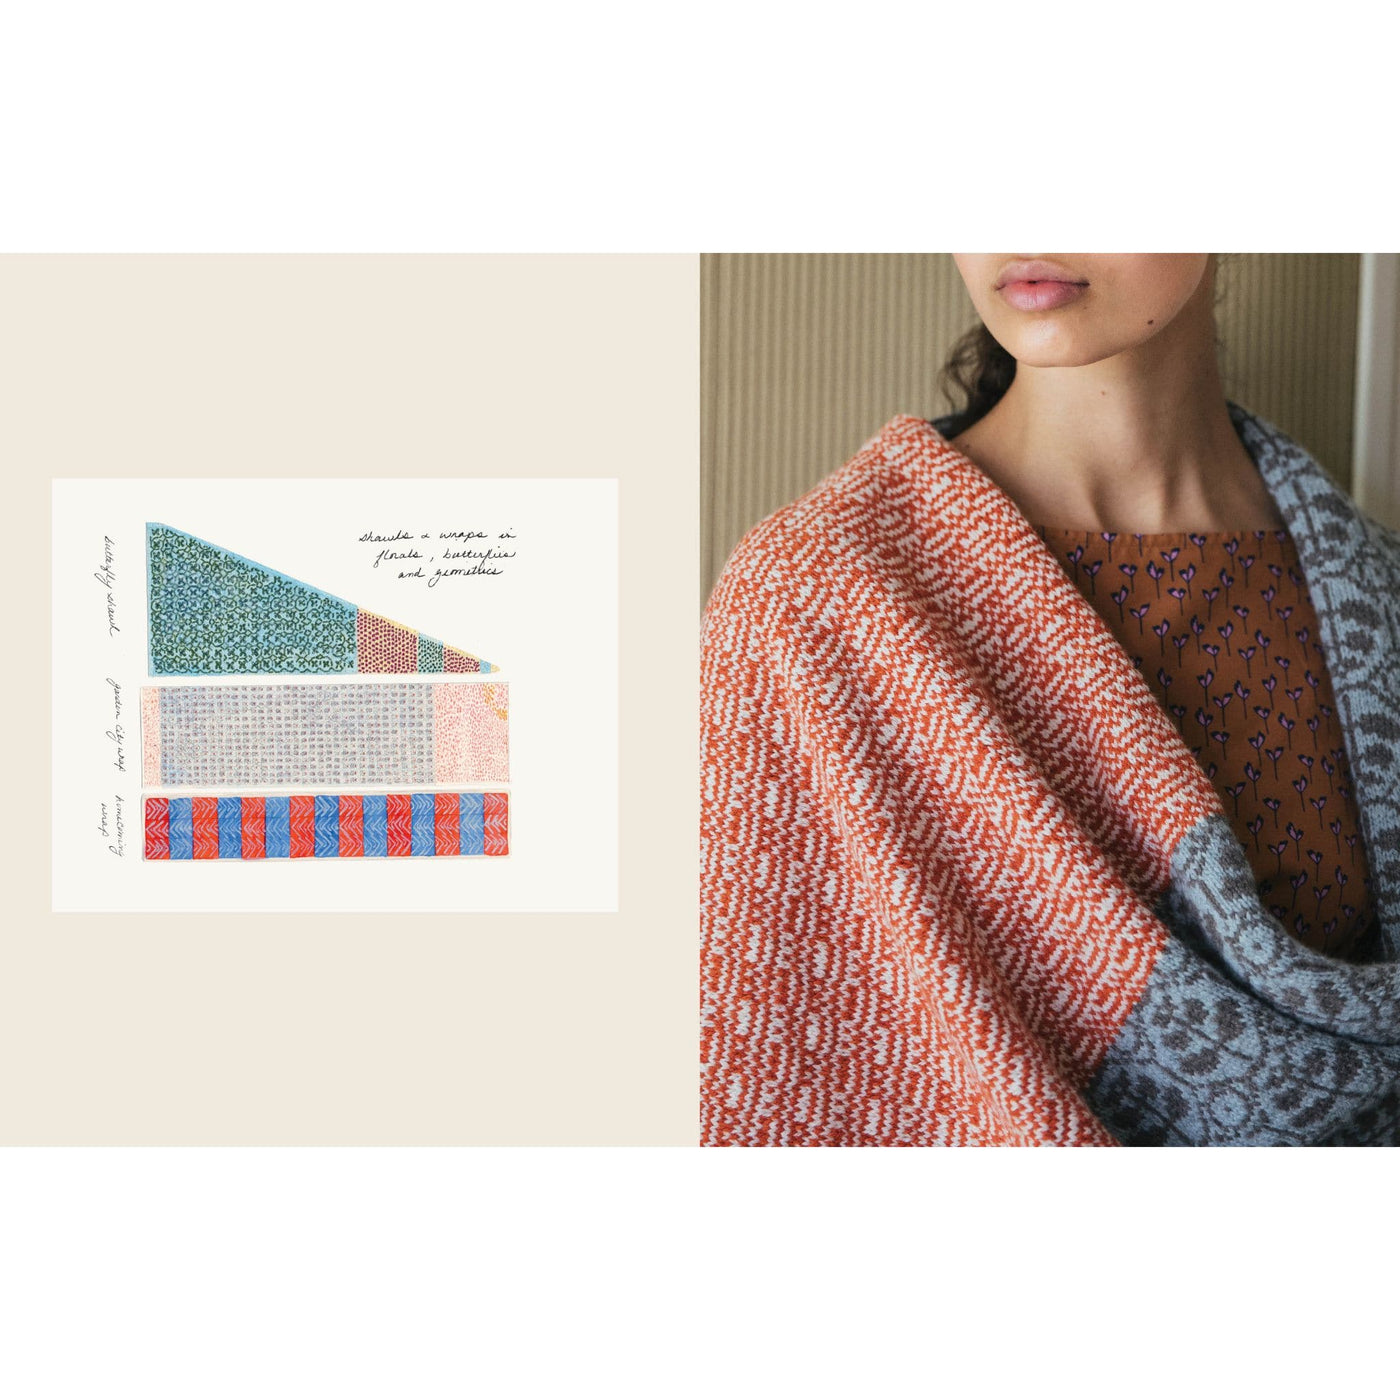 Page from The Knitted Fabric by Dee Hardwicke with a hand drawing and a finished shawl in multiple colors